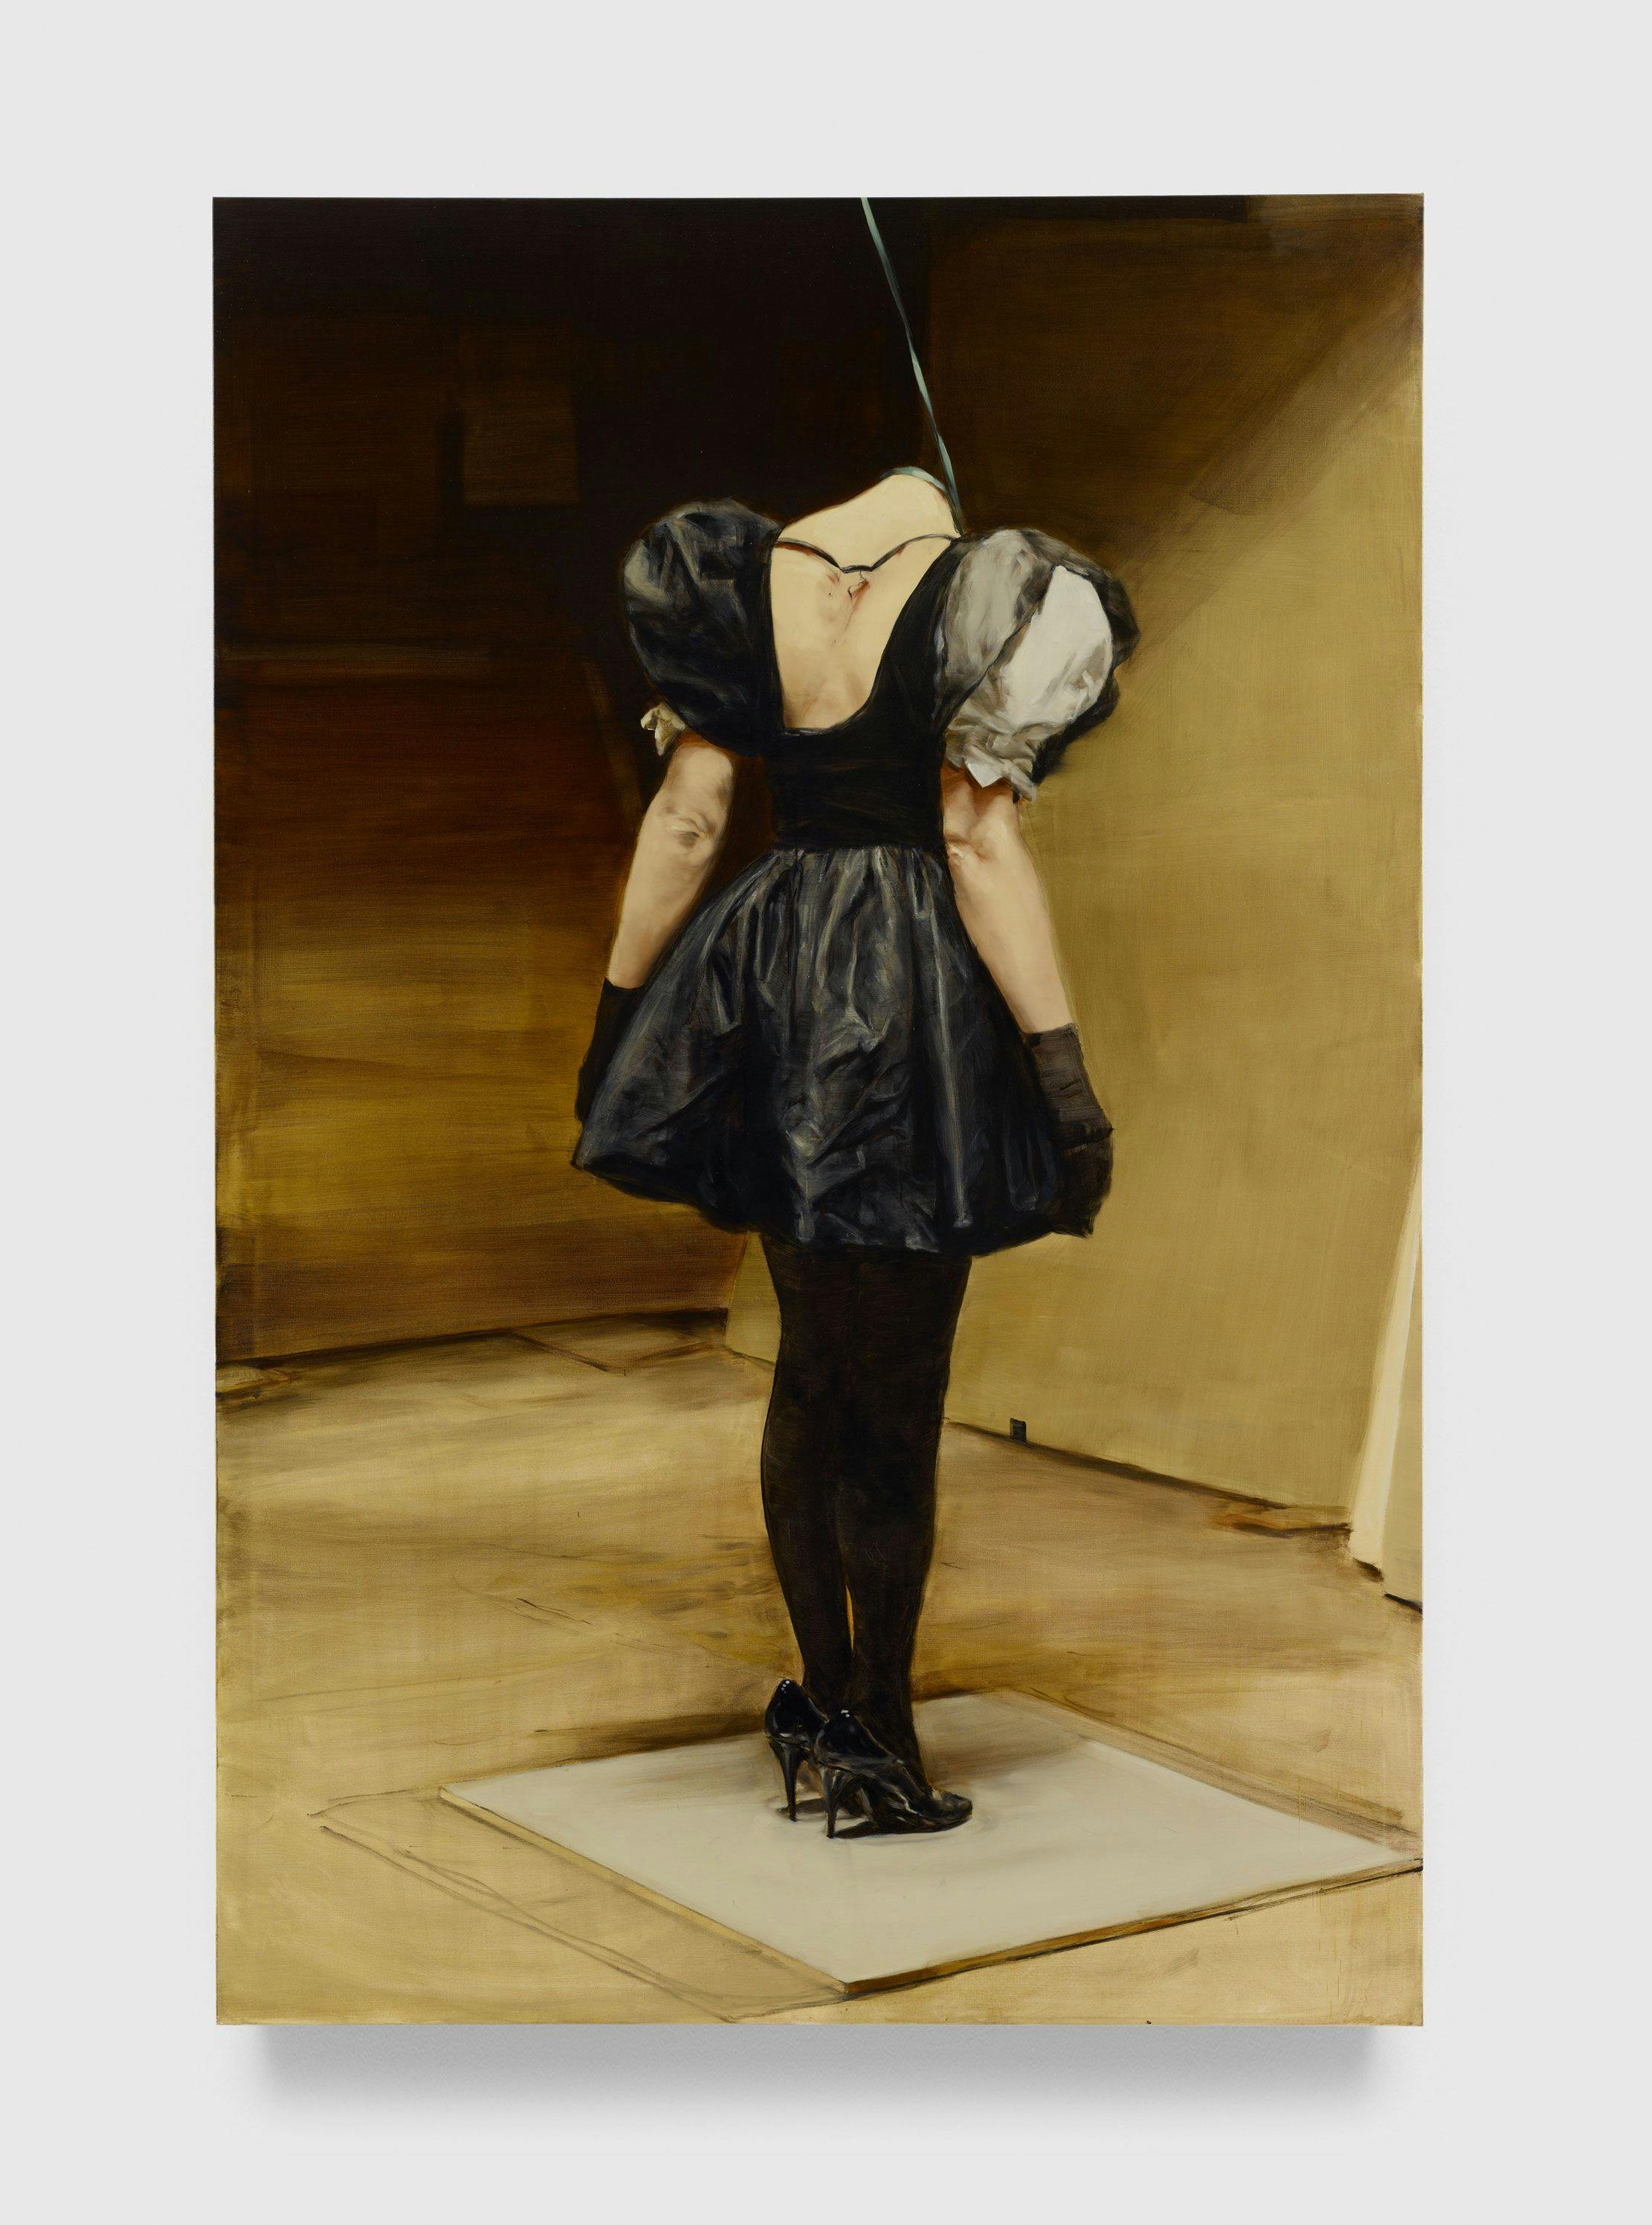 A painting by Michaël Borremans, titled The Loan, dated 2011.